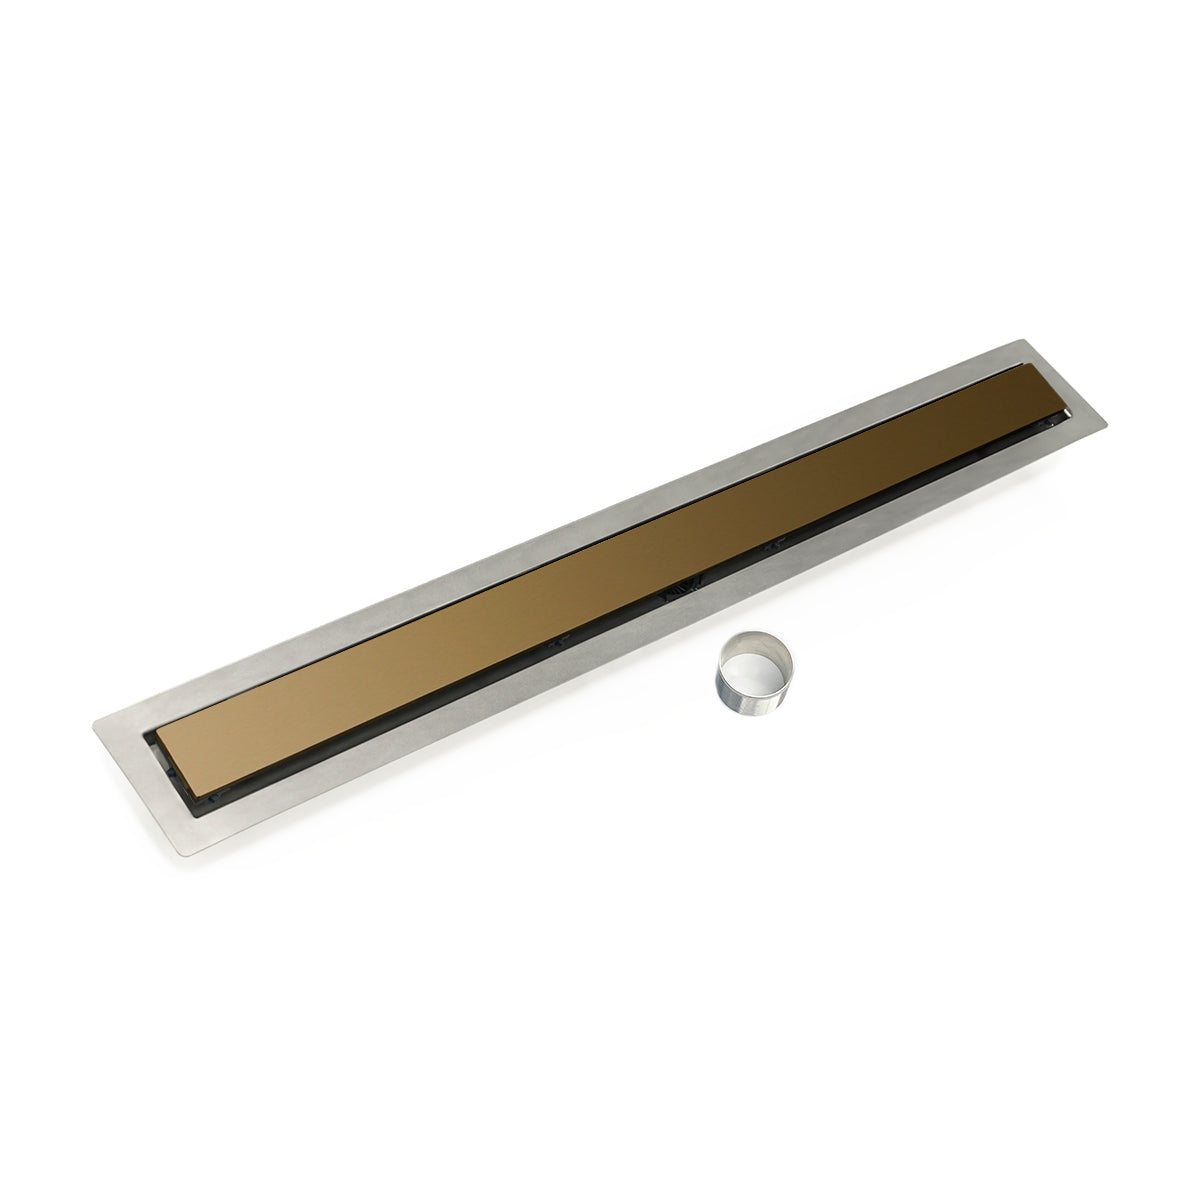 Infinity Drain 48" FCB Series Double Waterproofing Linear Drain Kit with 2 1/2" Solid Grate